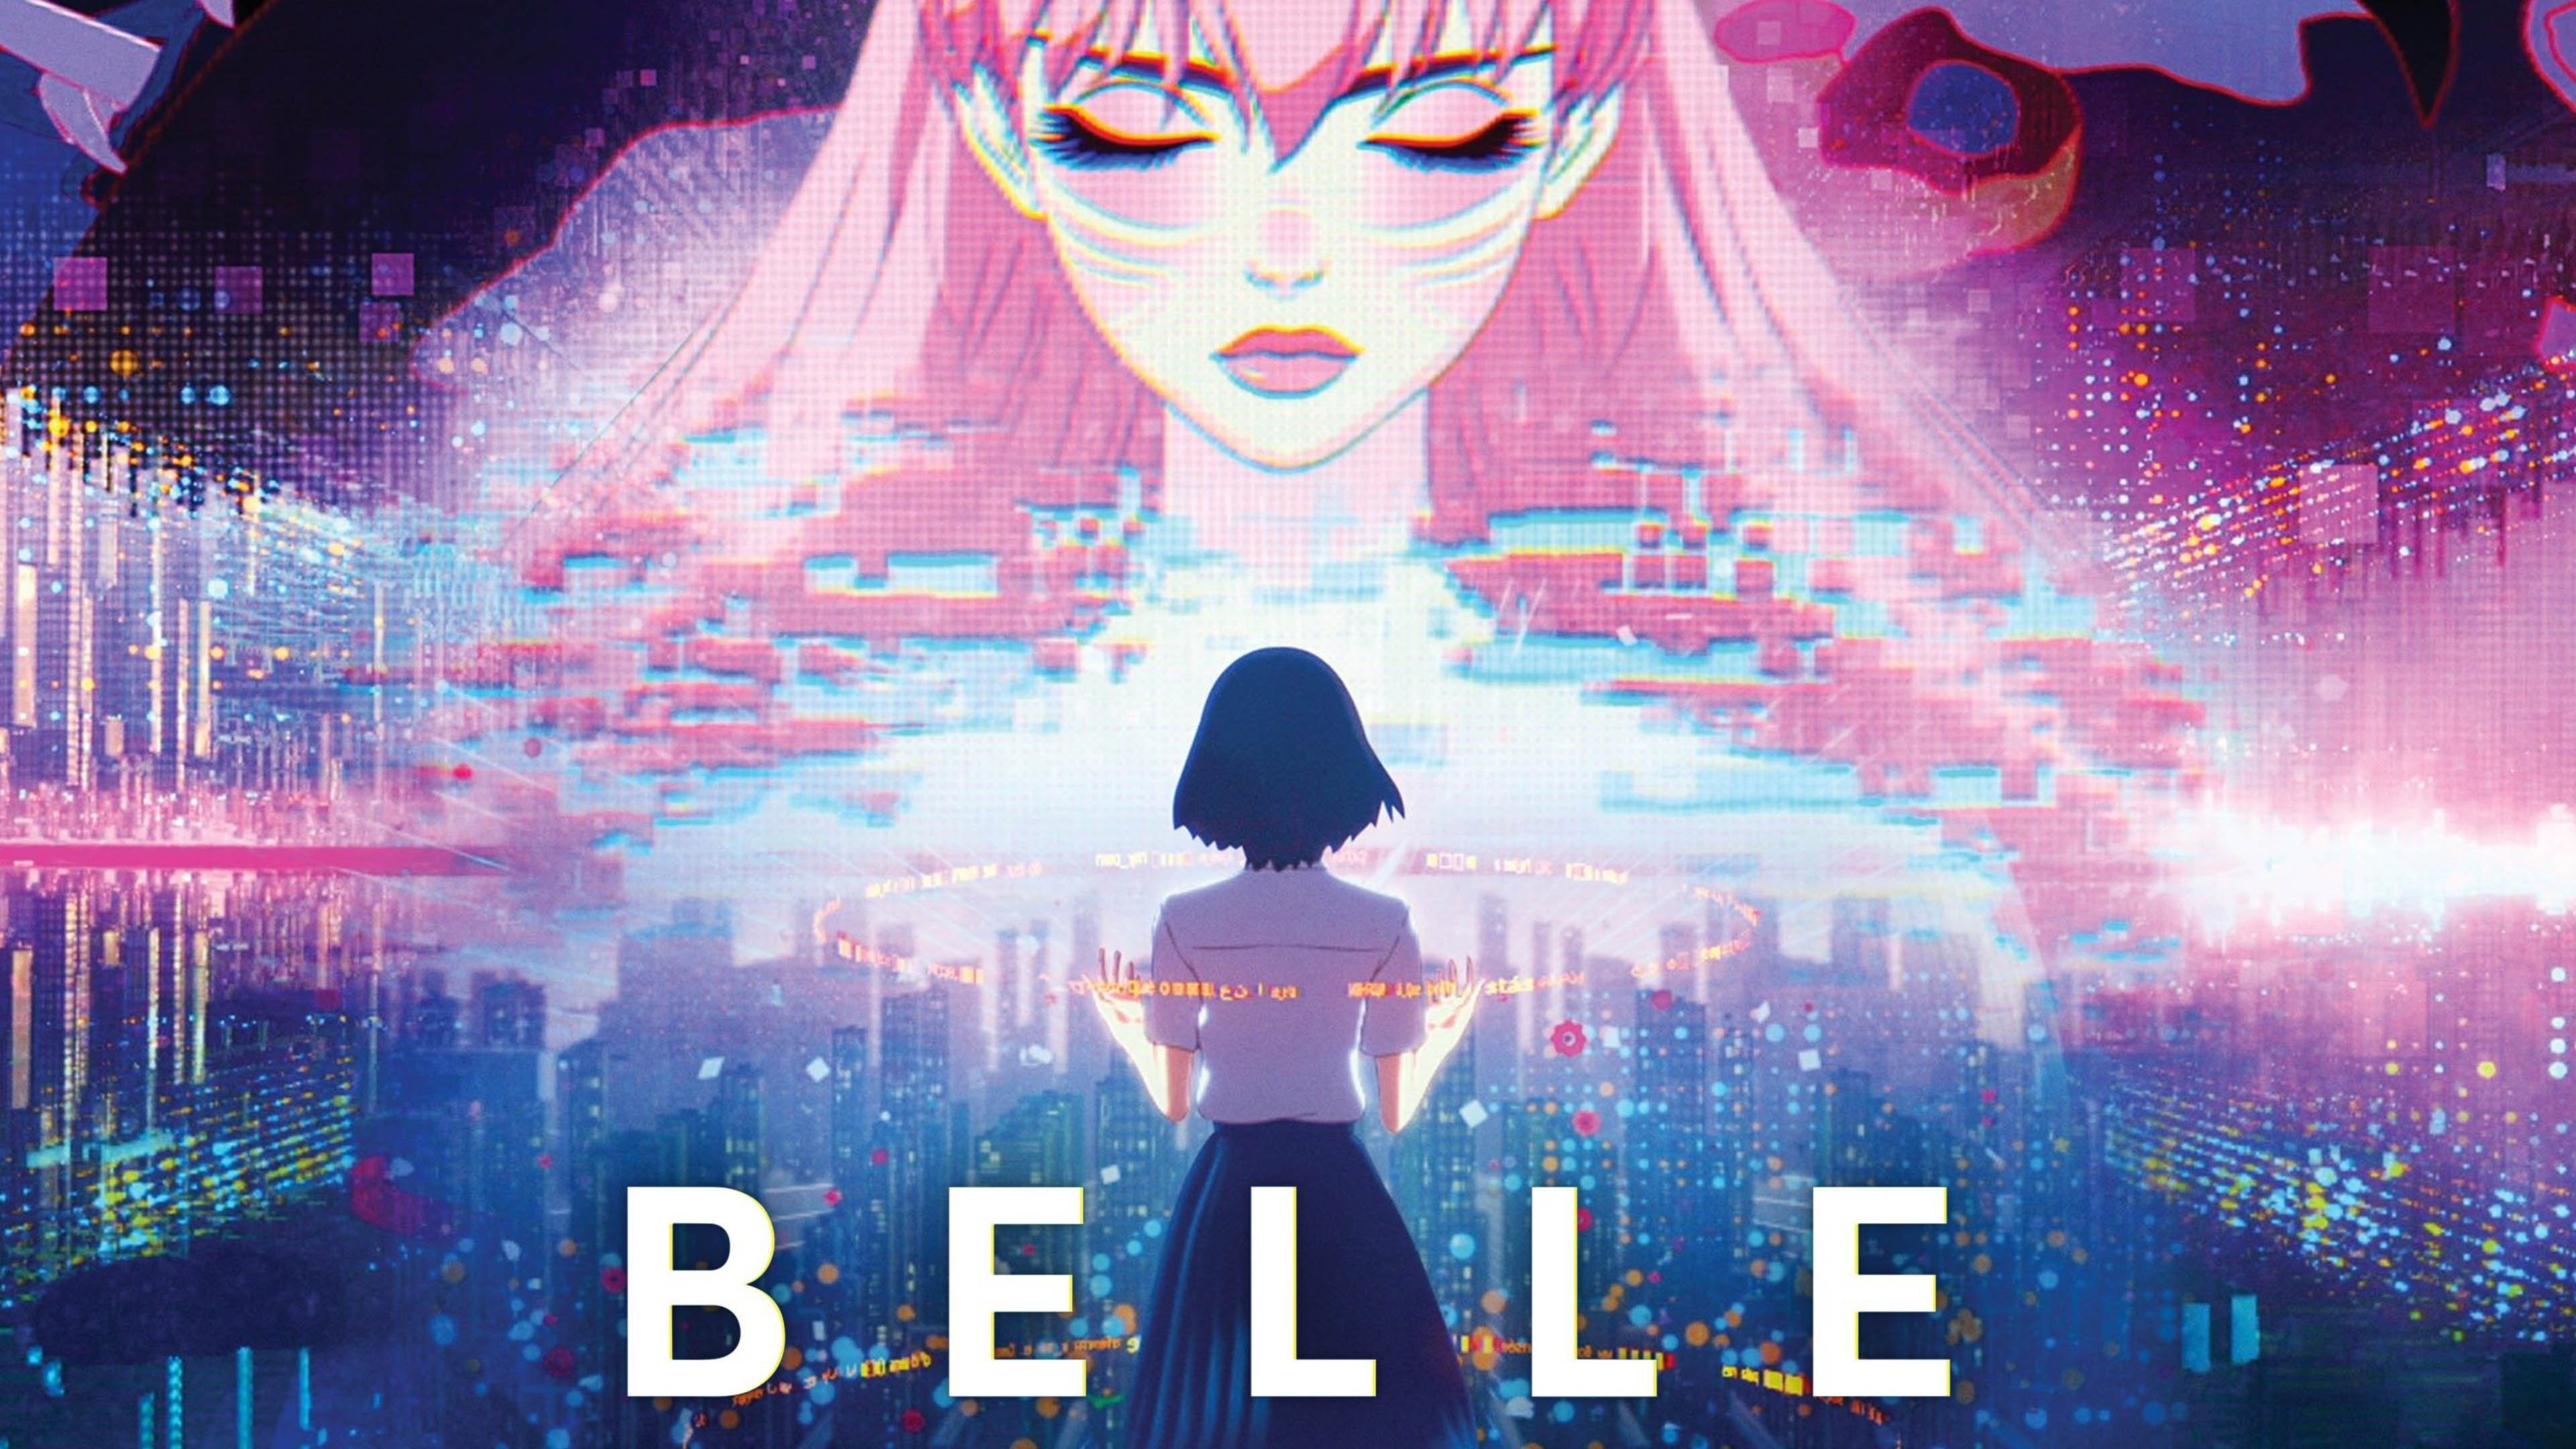 First Look At Mamoru Hosodas New Anime Film Belle